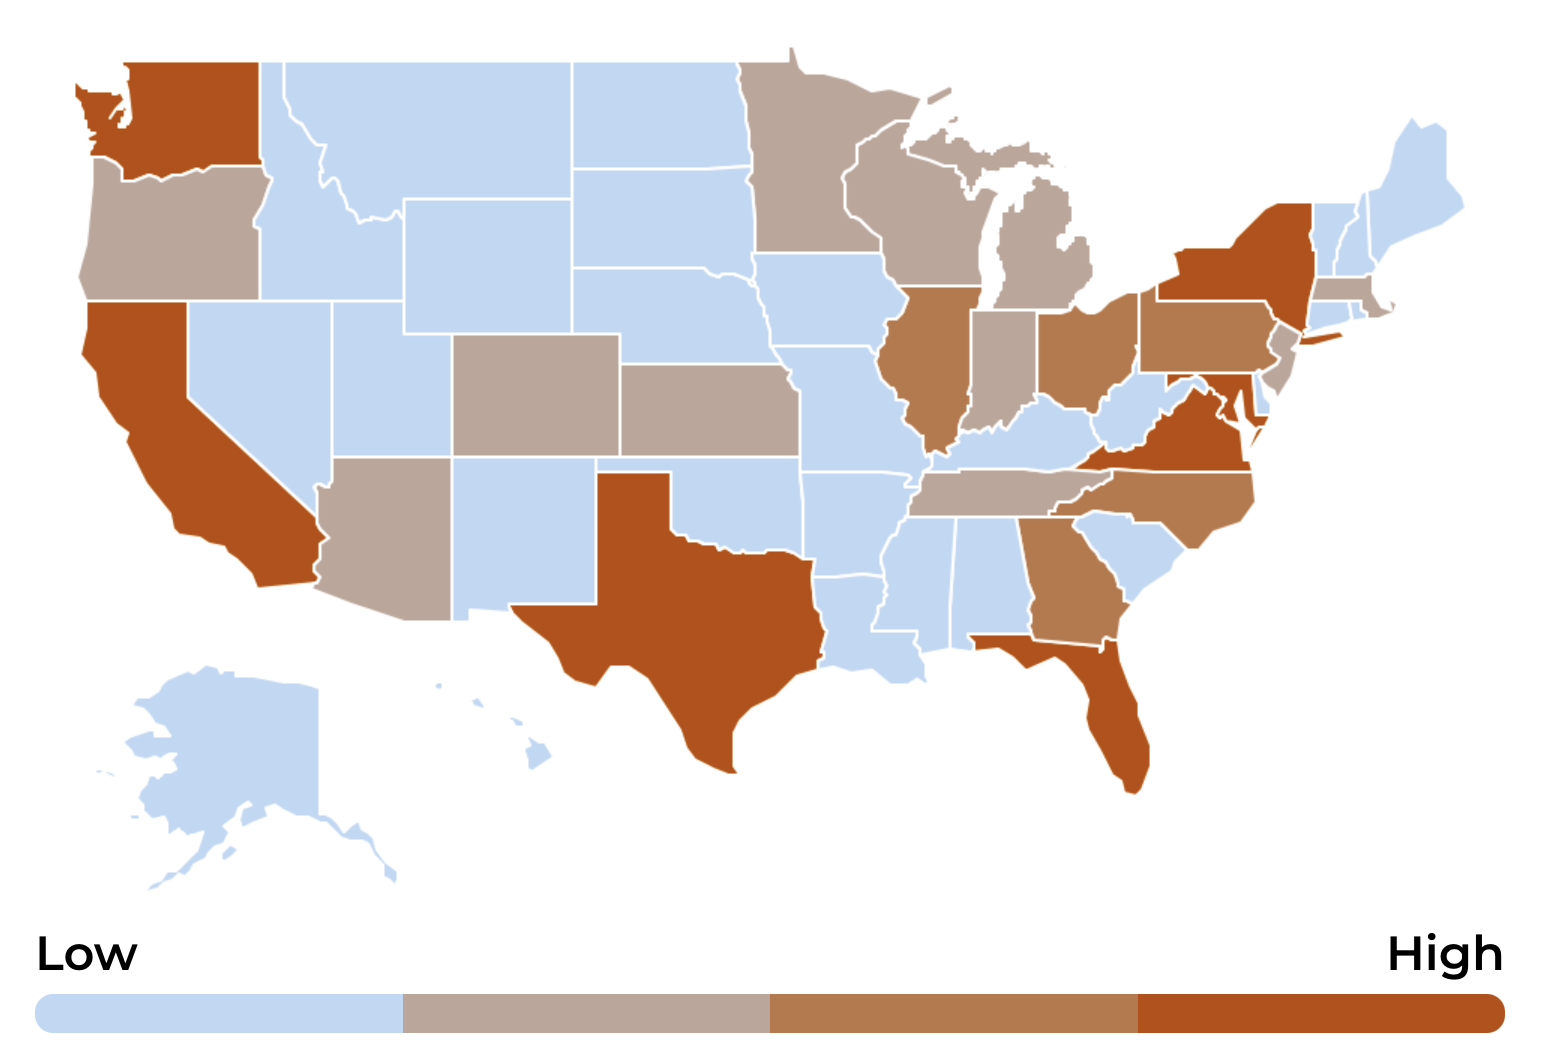 USA map showing more website visits in most populous states.